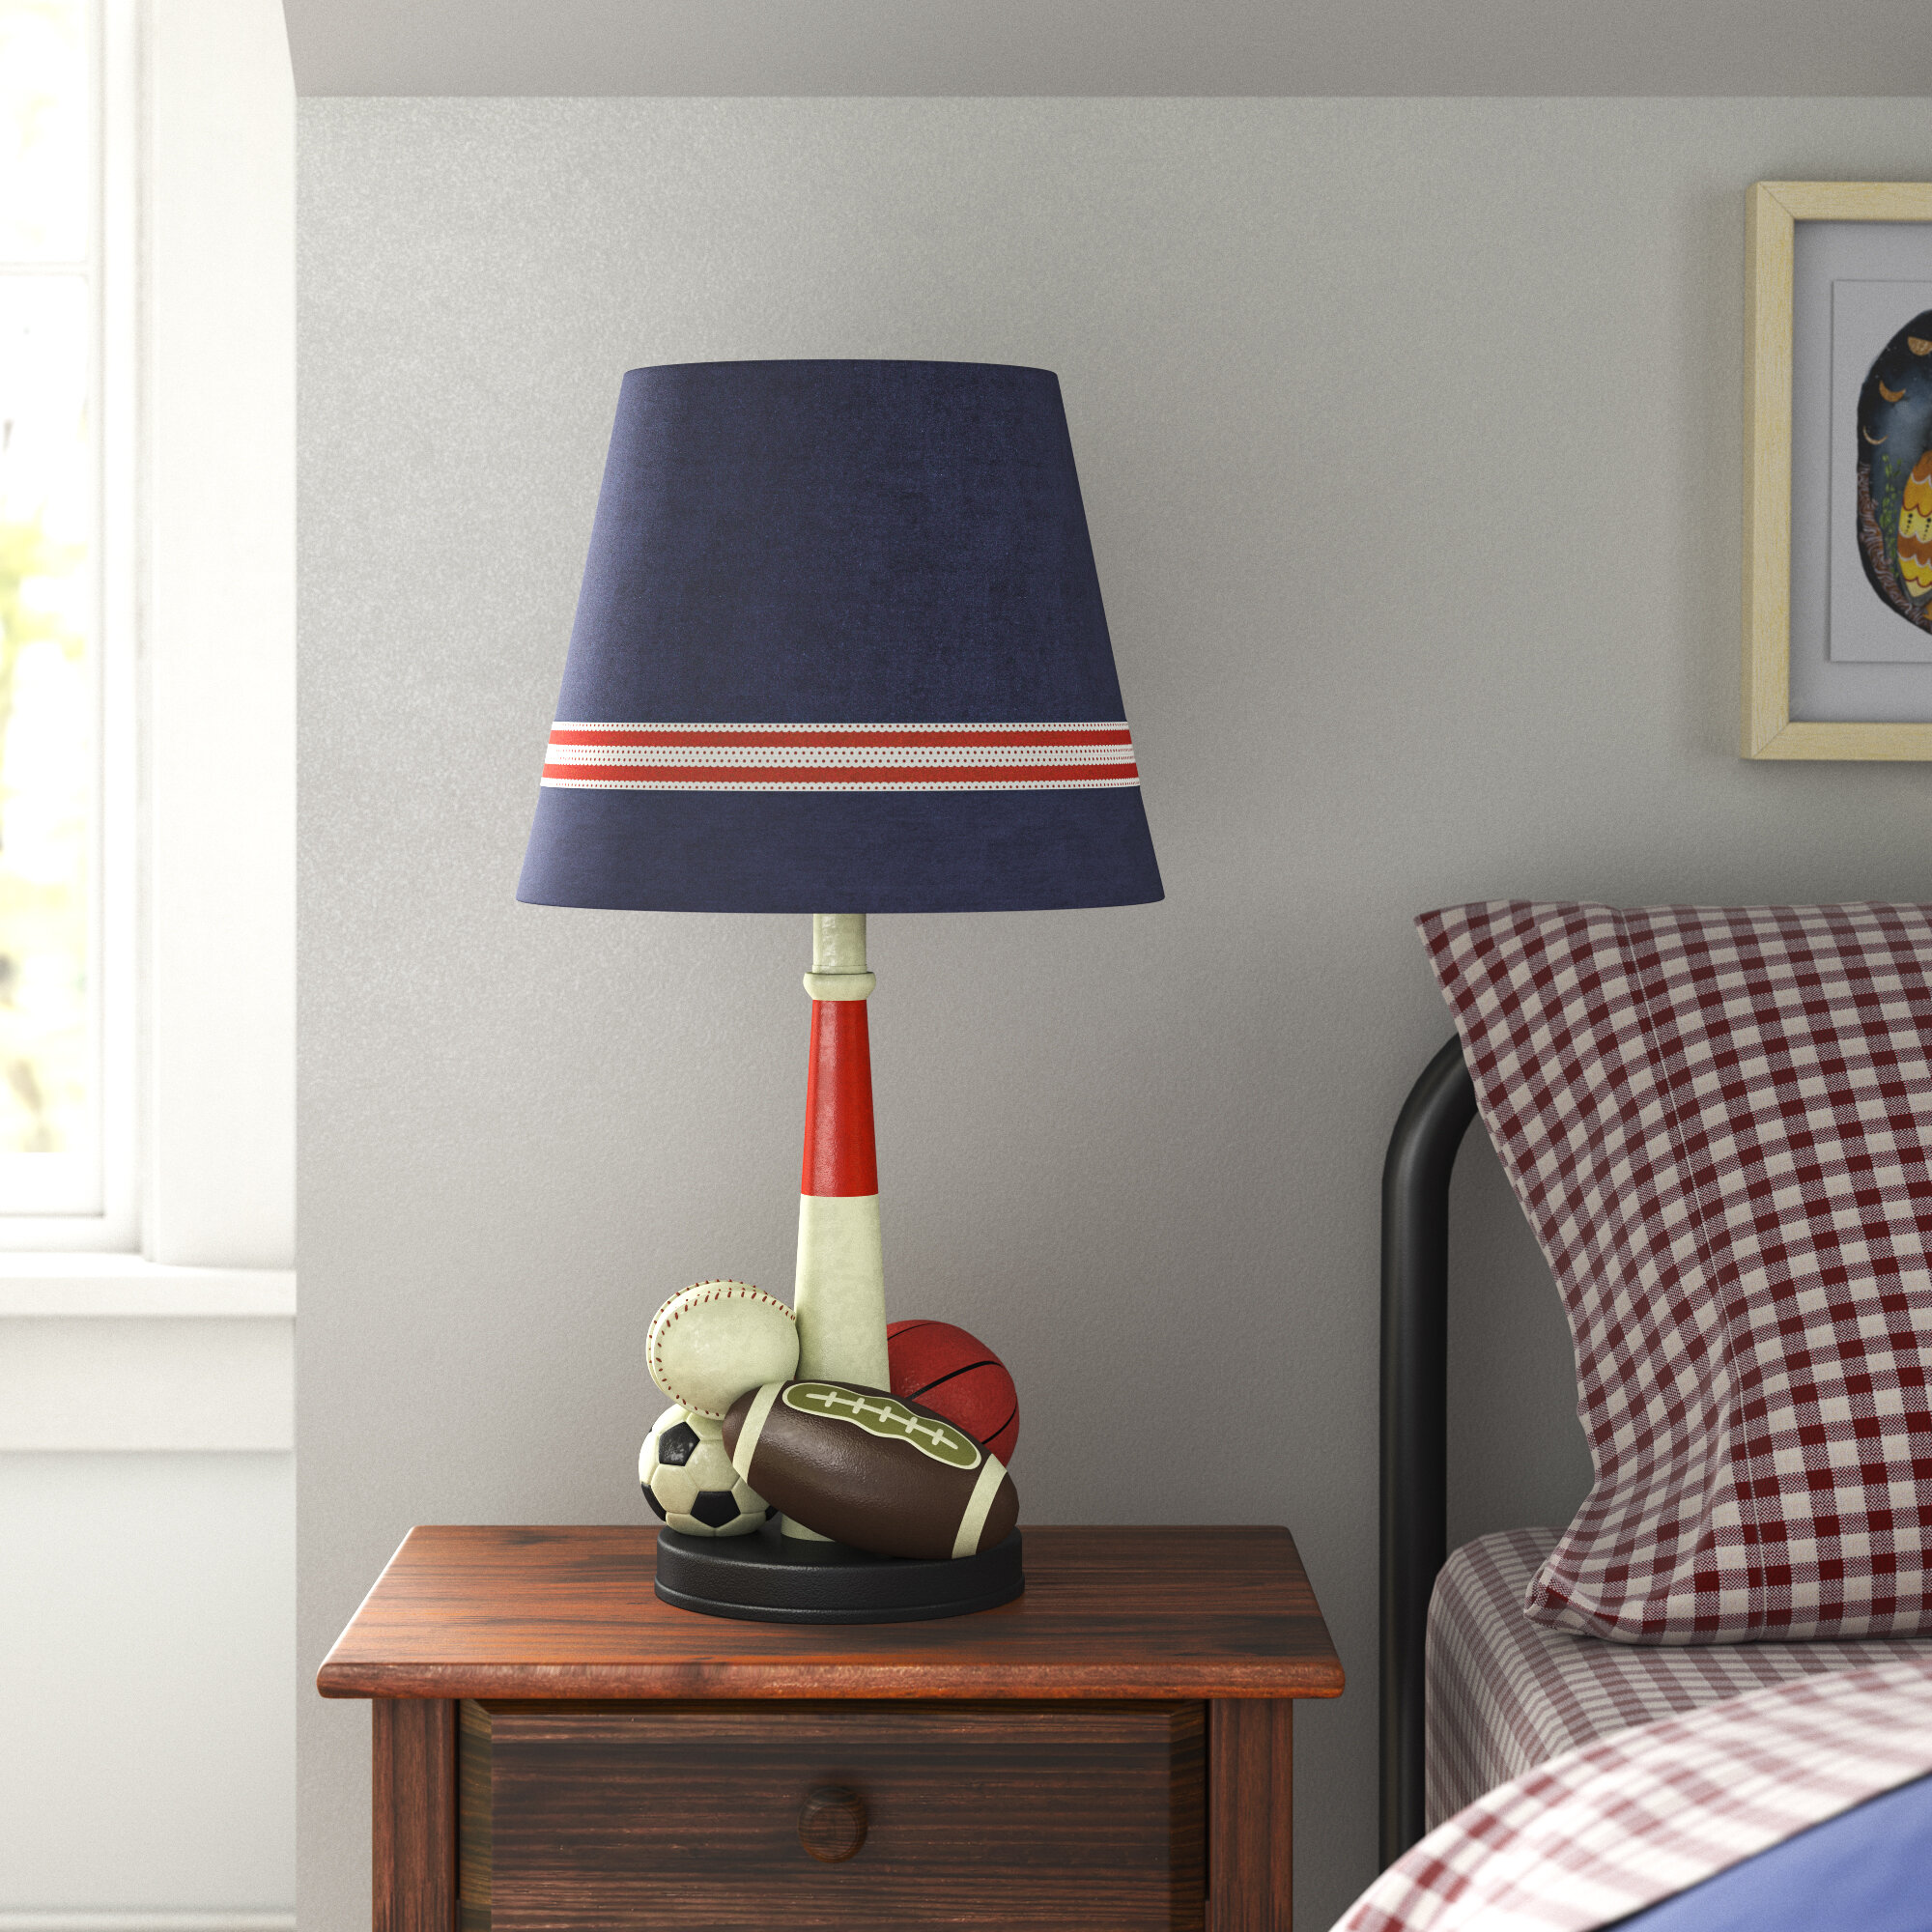 Gundey Polyresin 23 Table Lamp by Zoomie Kids